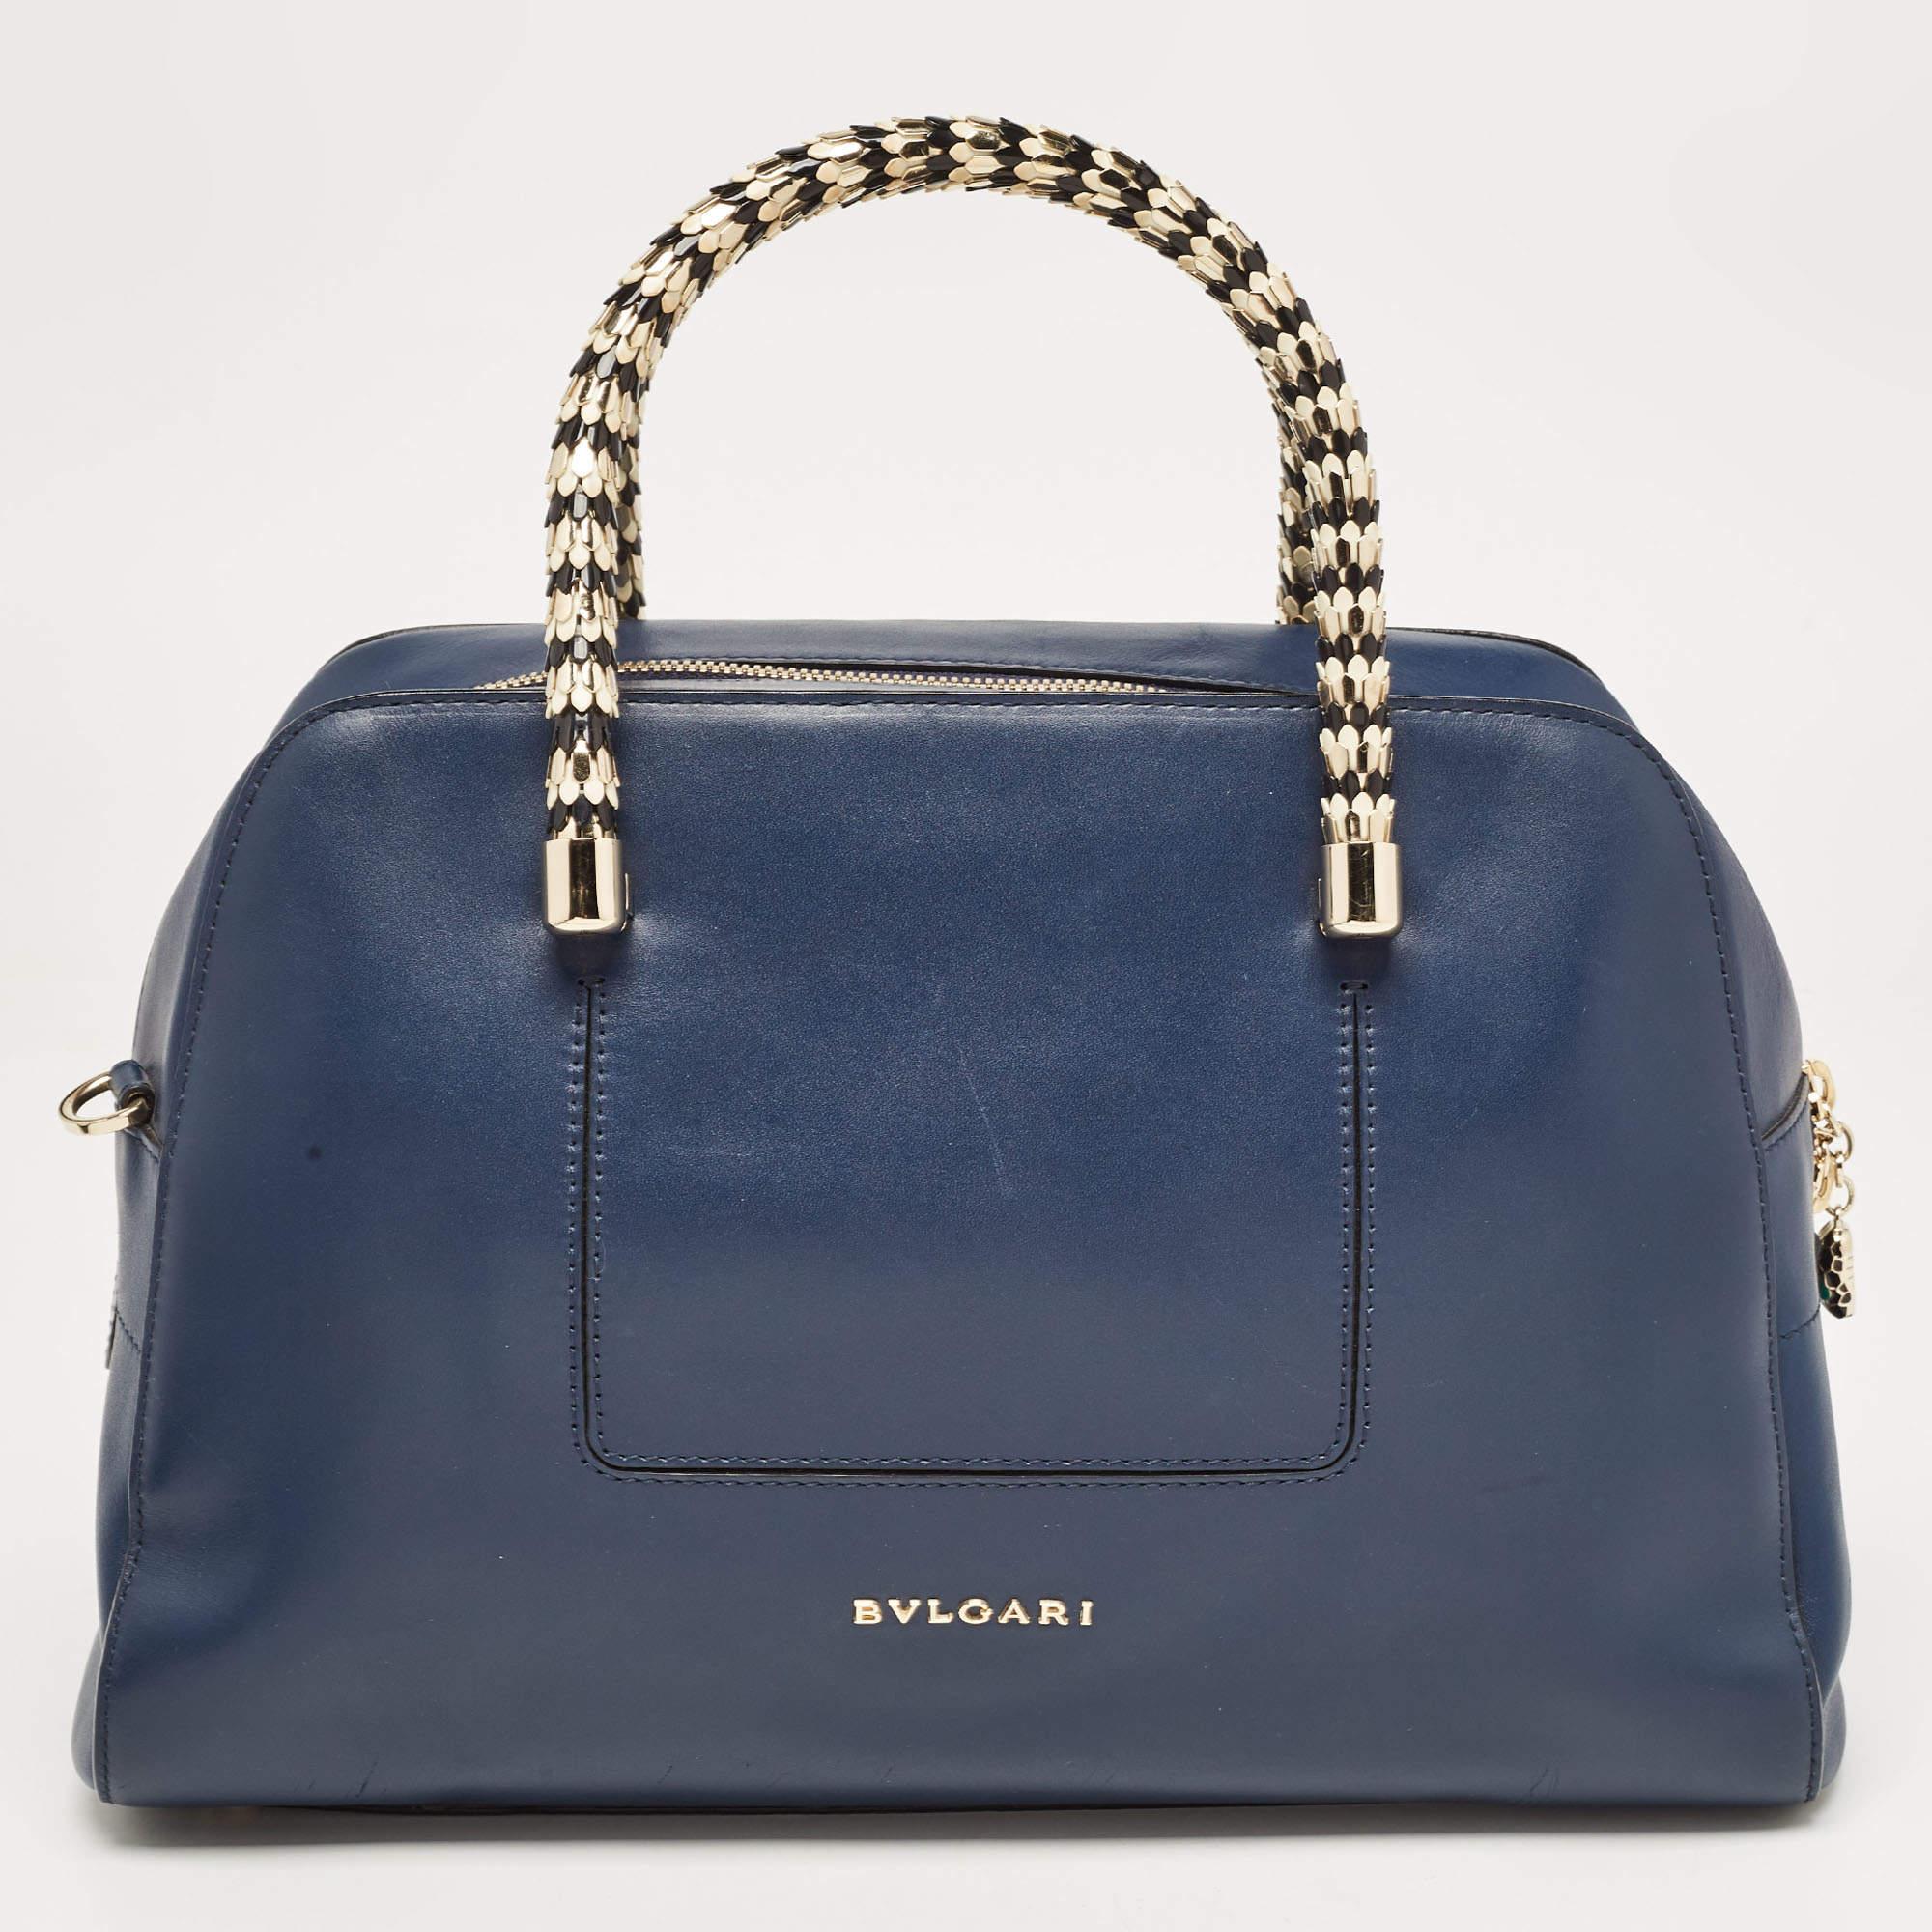 Crafted from leather, the Bvlgari Serpenti Scaglie bag is styled with snake handles and has the iconic Serpenti head on the zip puller. The bag comes with a spacious suede-lined interior and has a removable shoulder strap for an easy carrying